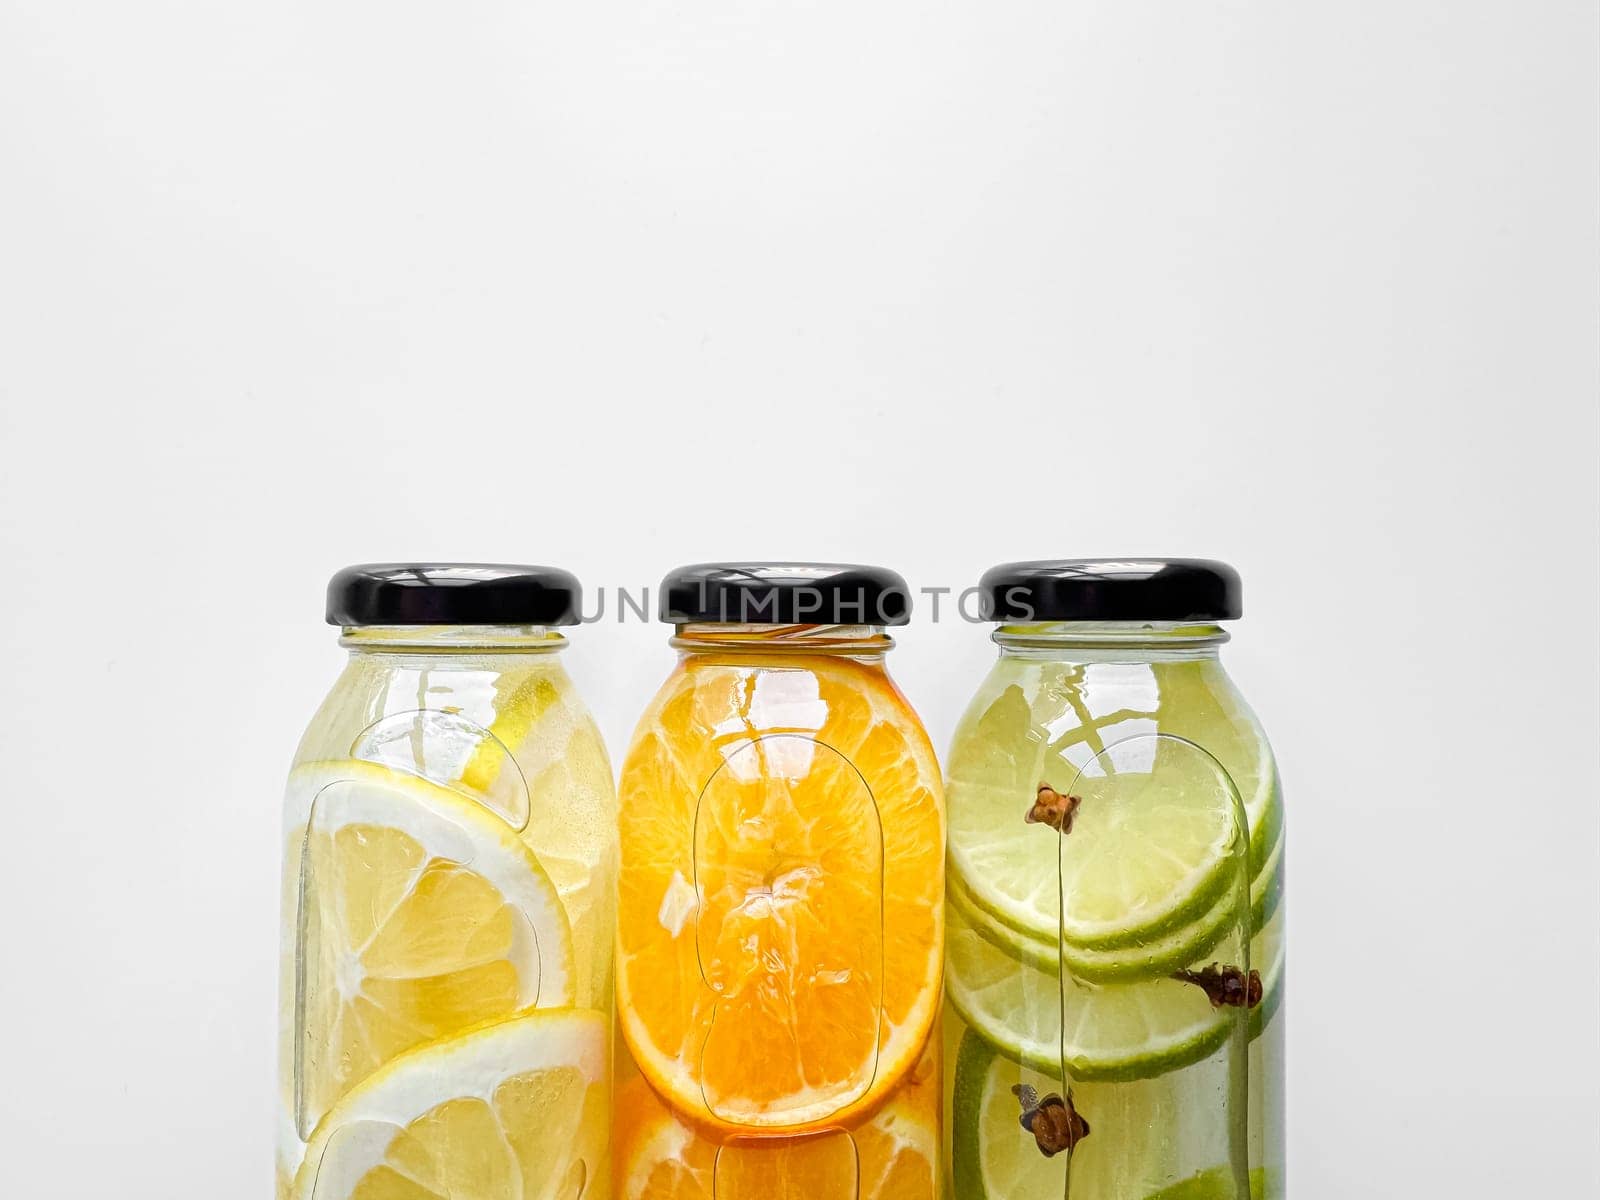 Lemon, orange, and lime detox drinks in glass bottles on white background with copy space. Concept for design and print. by Lunnica